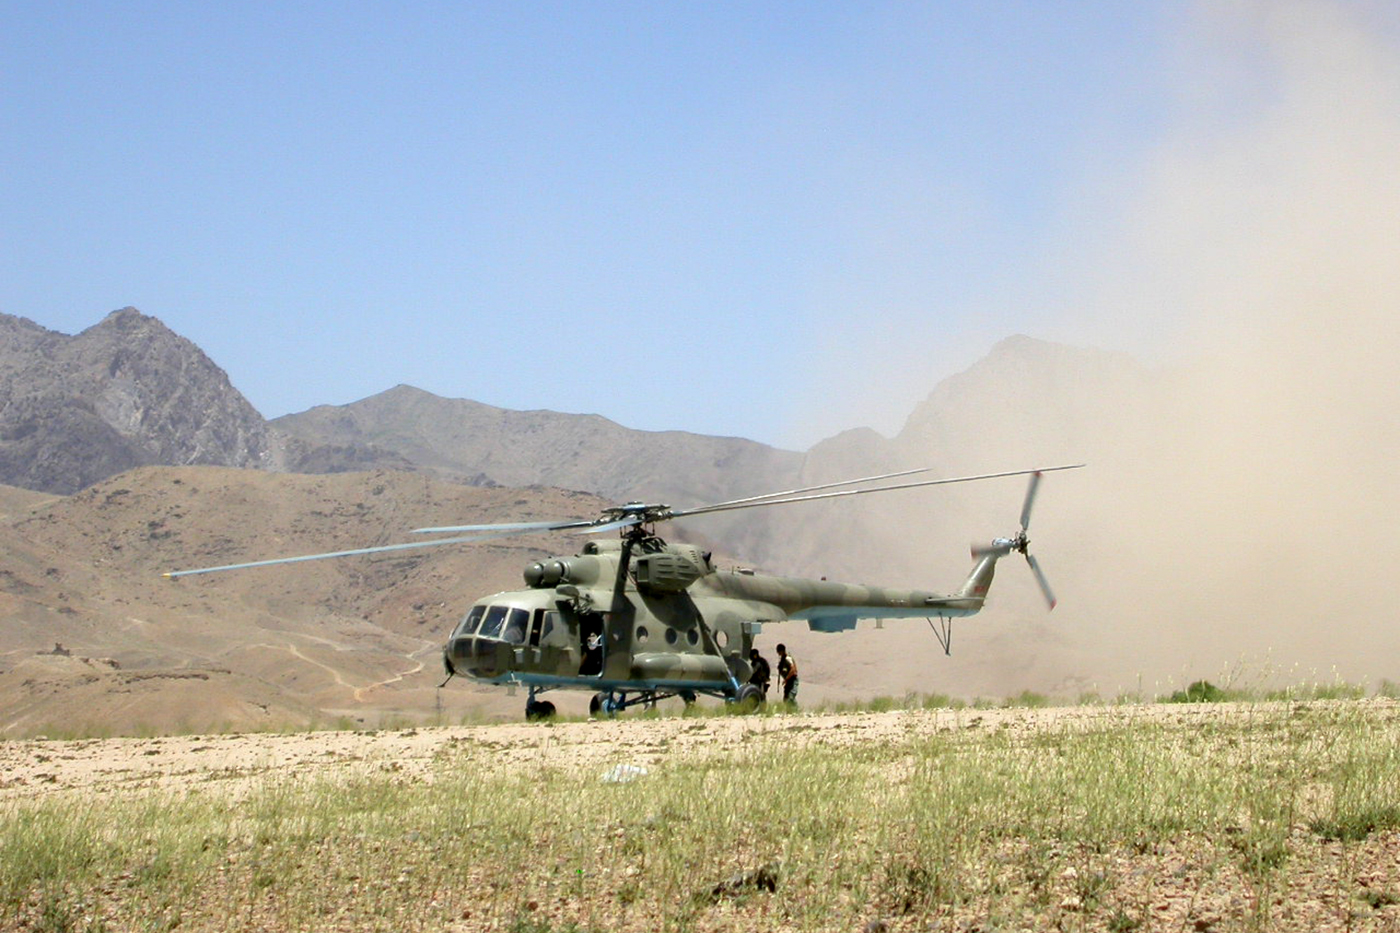 A Russian Mi-17 helicopter Phil McTigue used during the Drug Enforcement Administration’s operations targeting a Taliban drug cache in a mountainous region north of Kabul, Afghanistan.